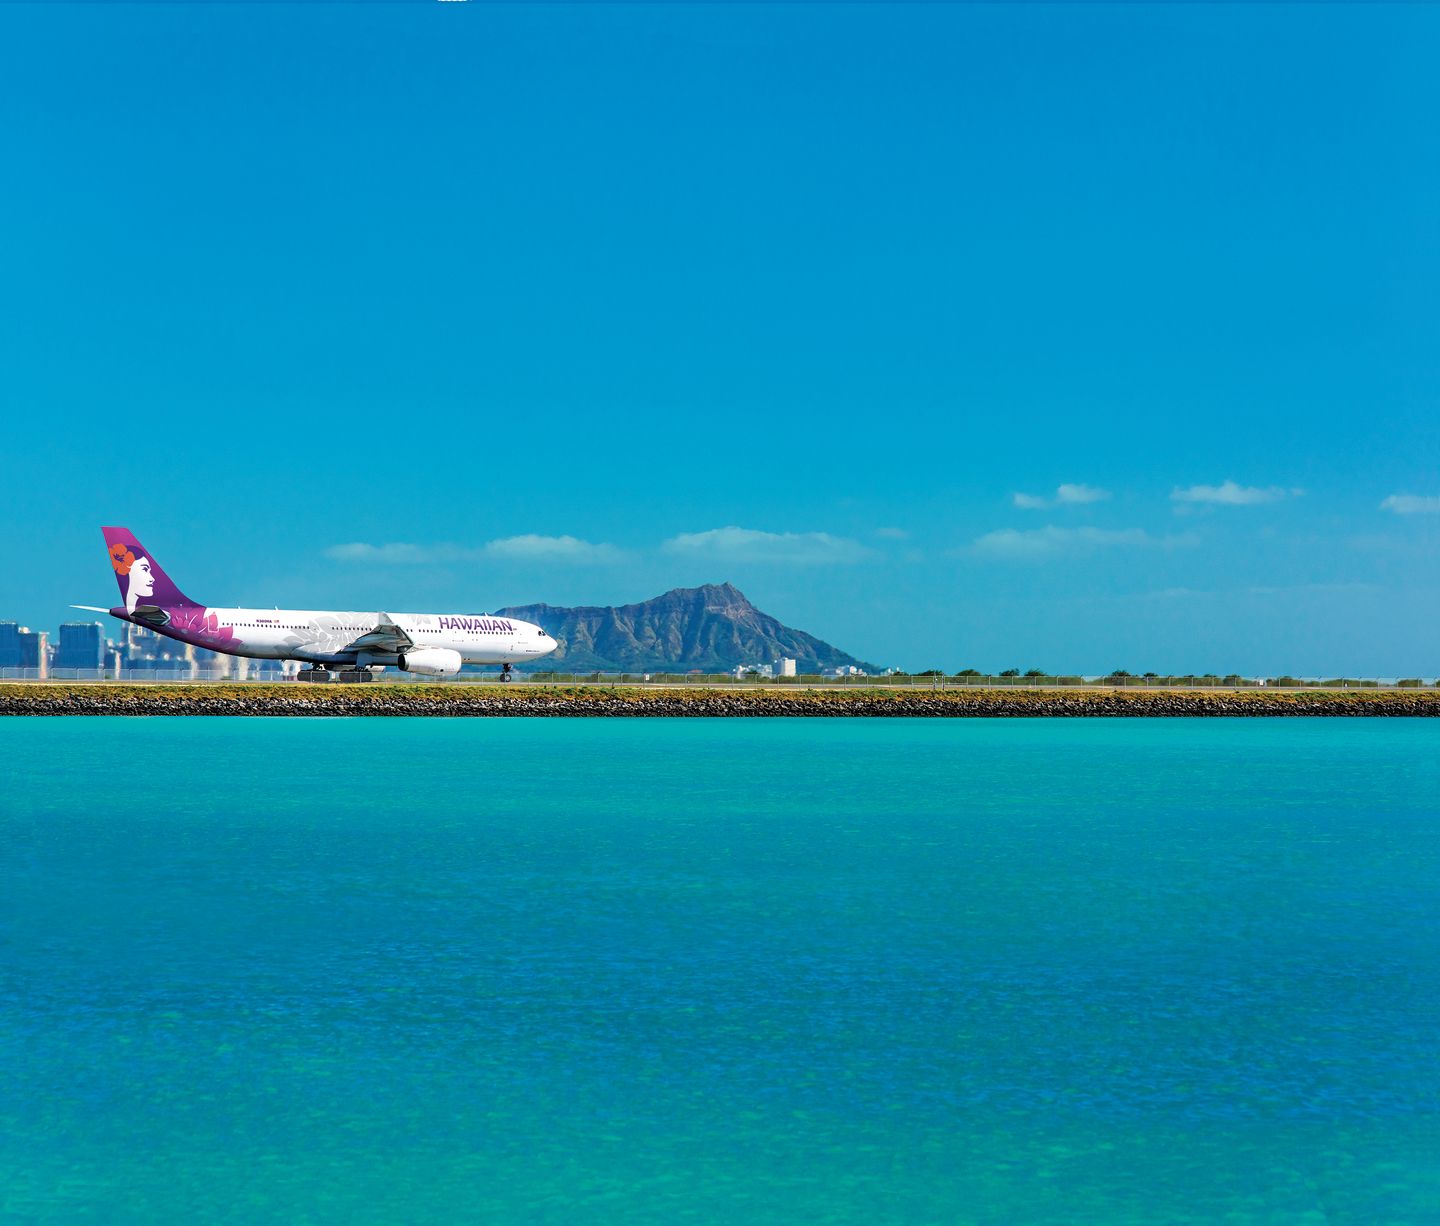 White Airbus 330 aircraft with pink and purple Hawaiian Airlines branding on a runway with a mountain in the background and blue ocean in the foreground